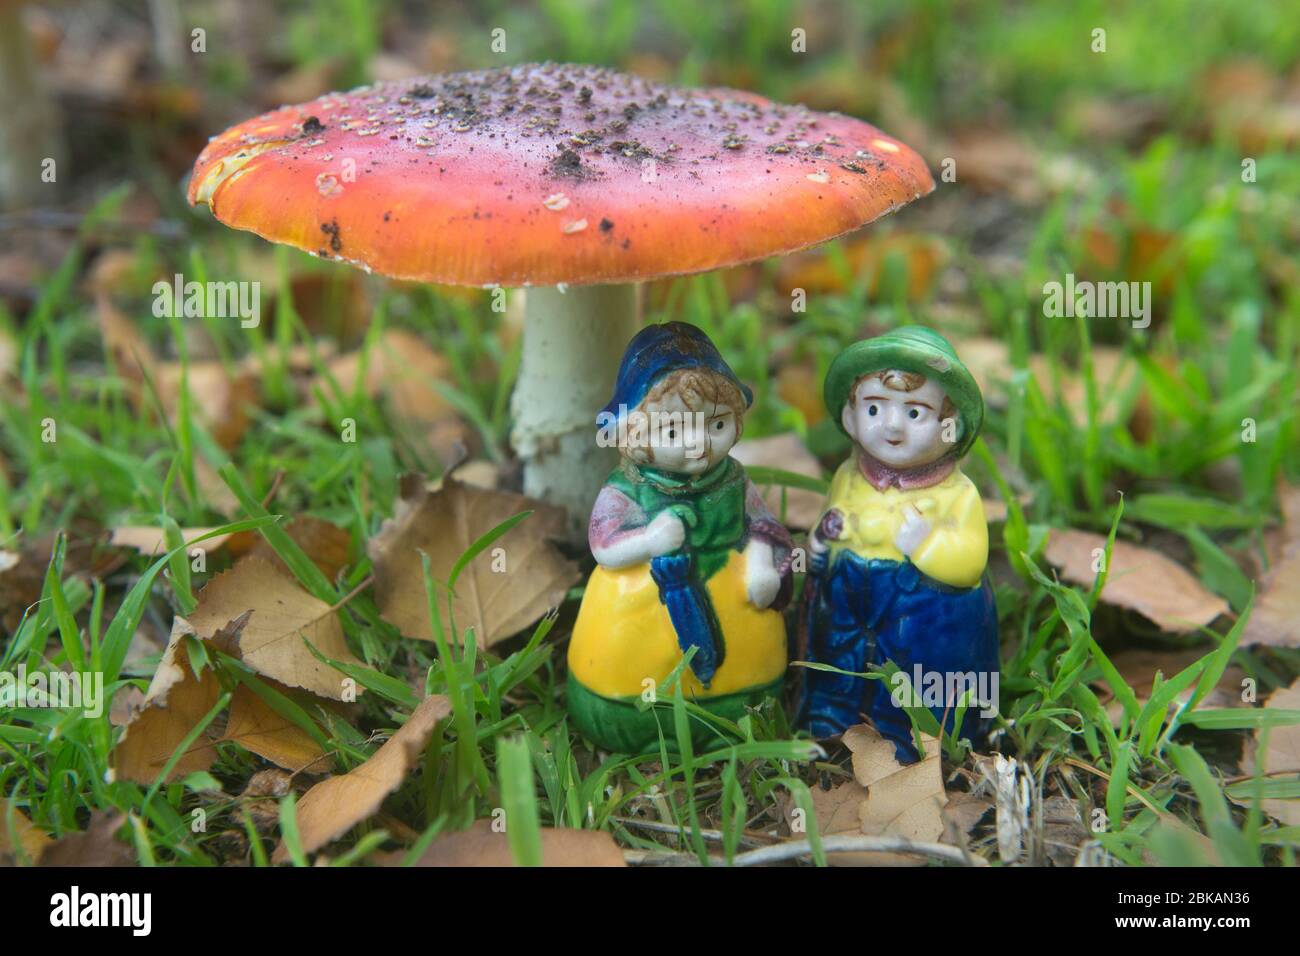 Two china dolls under a  toadstool among grass and leaves Stock Photo